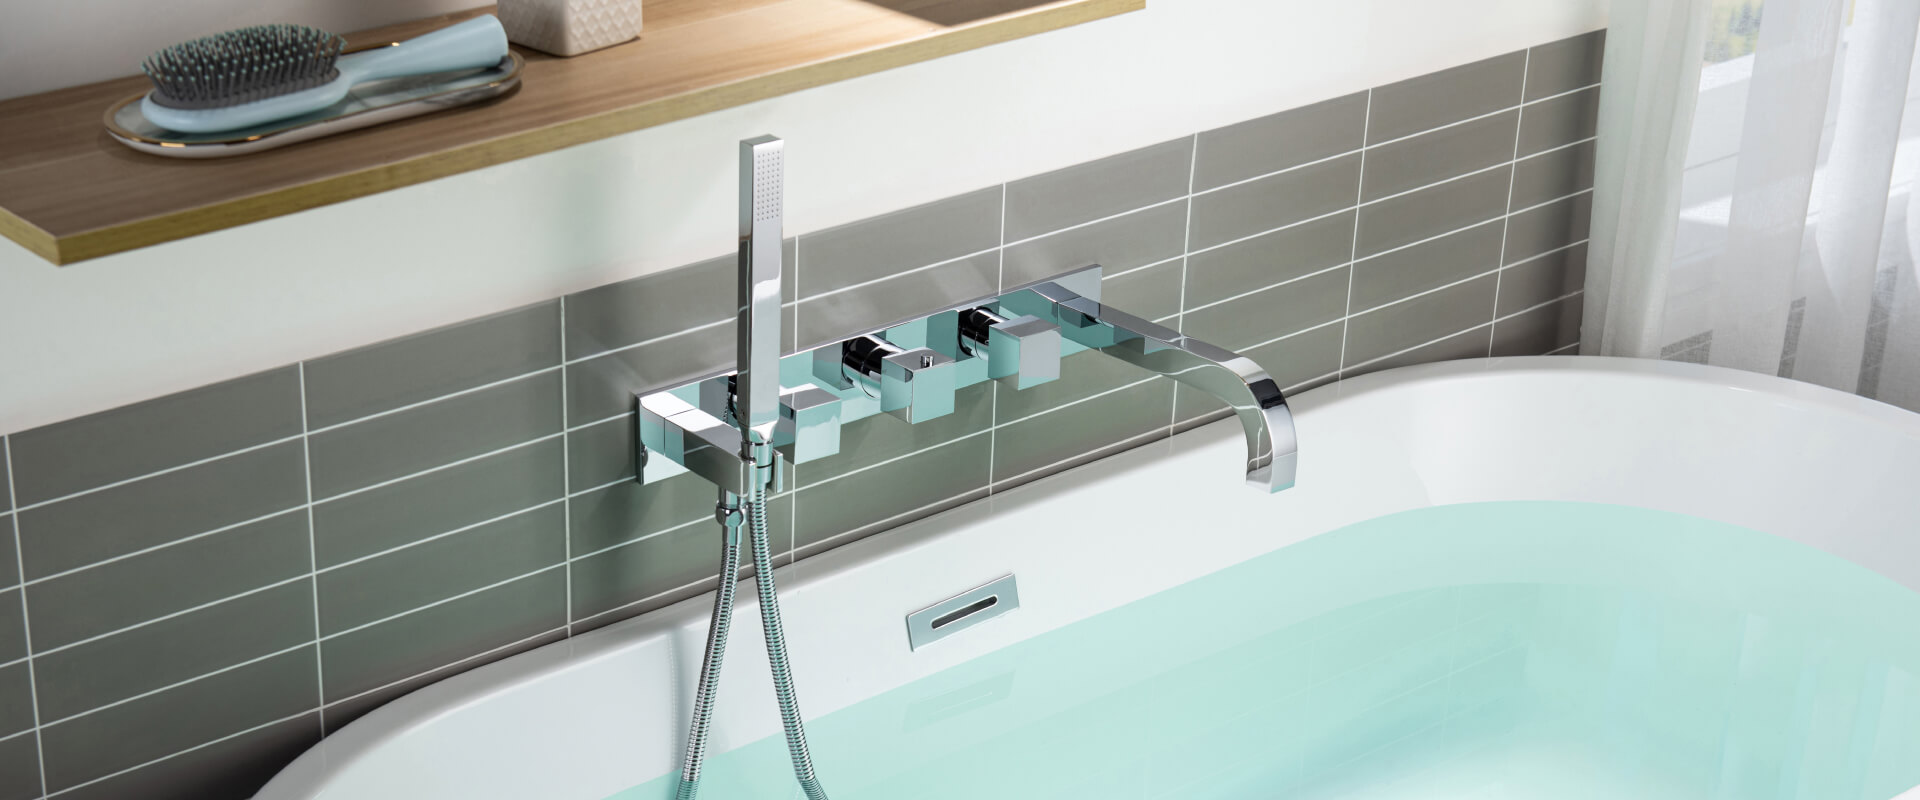 wall mount tub faucet with grey tile